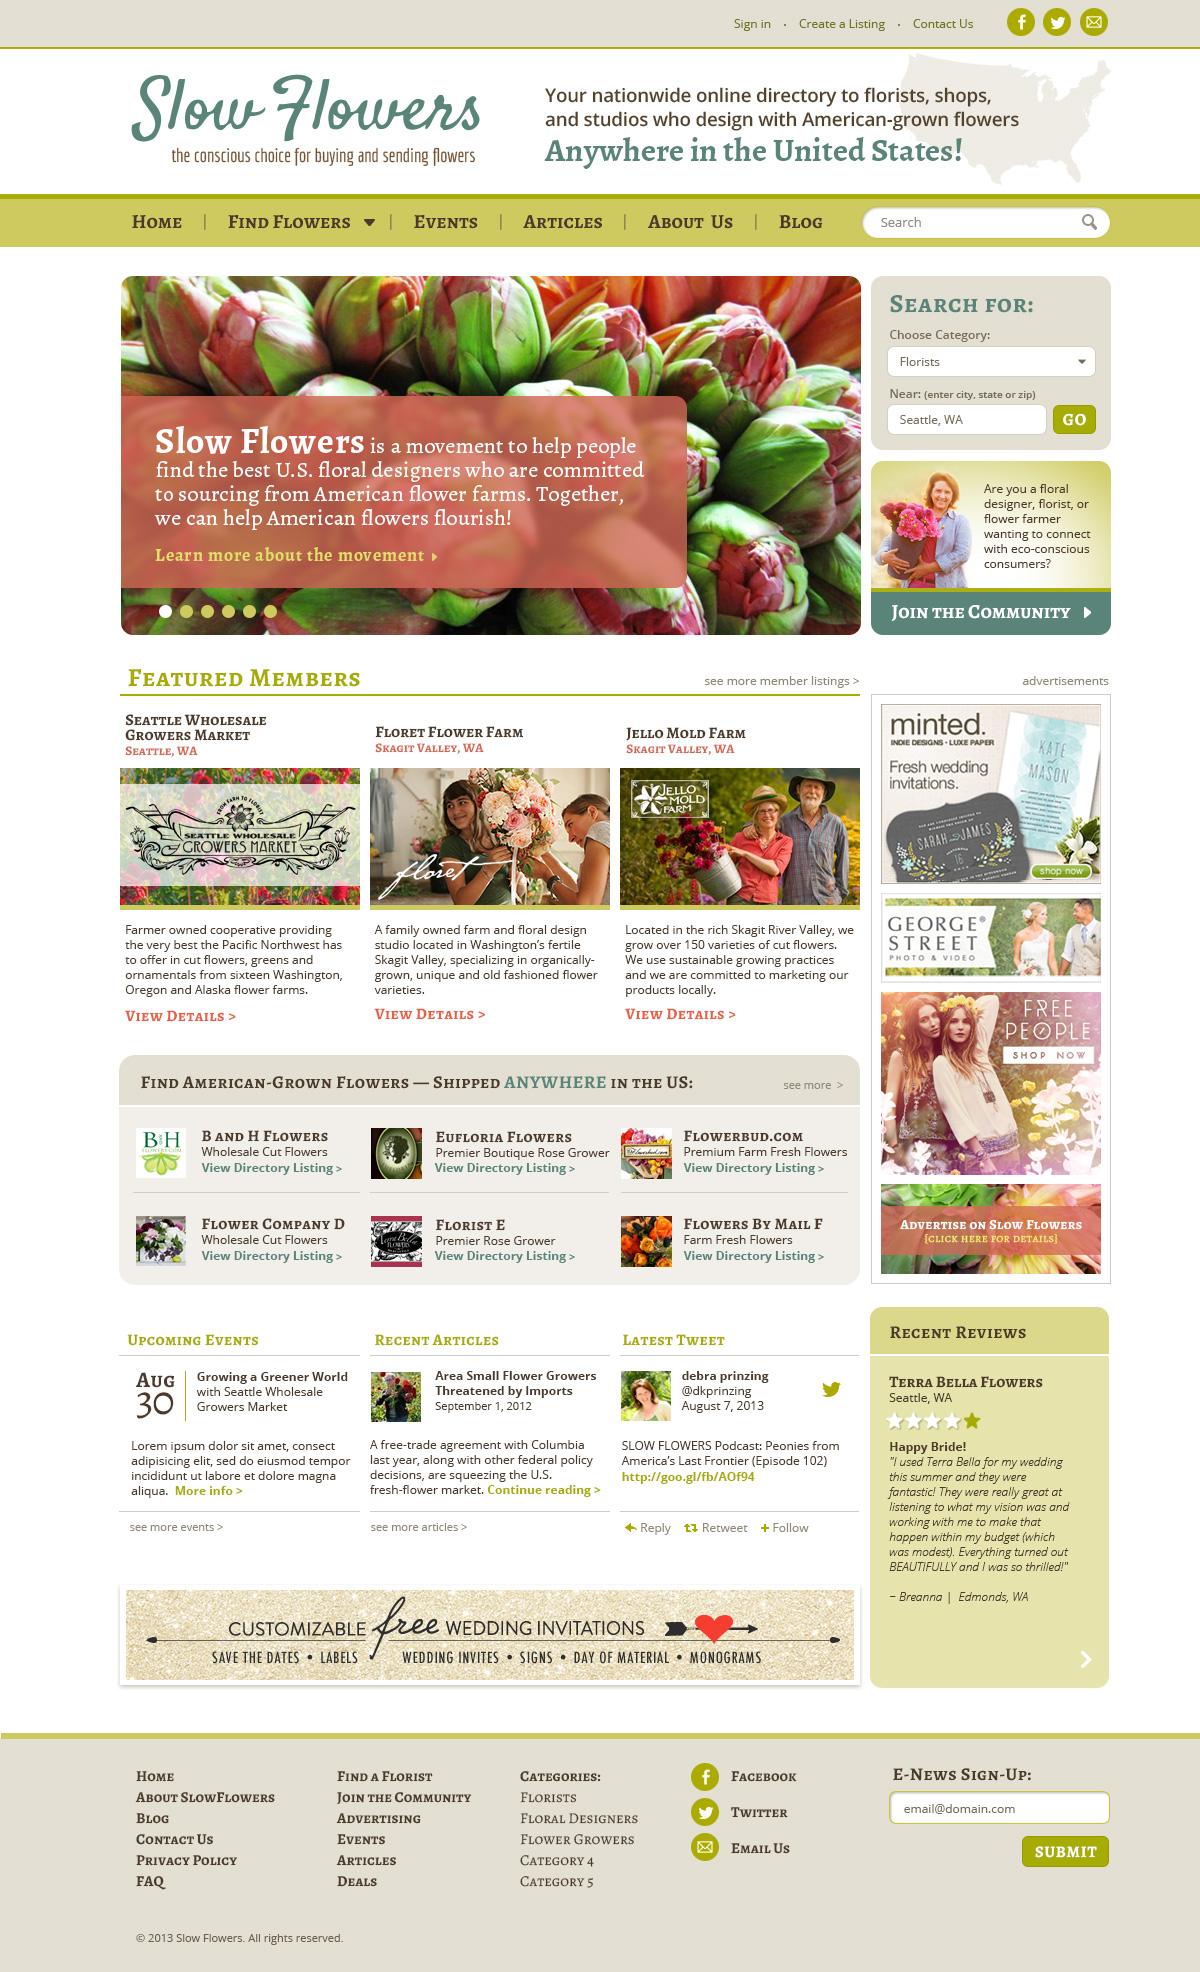 Here is the sample Home Page for the Slowflowers.com site